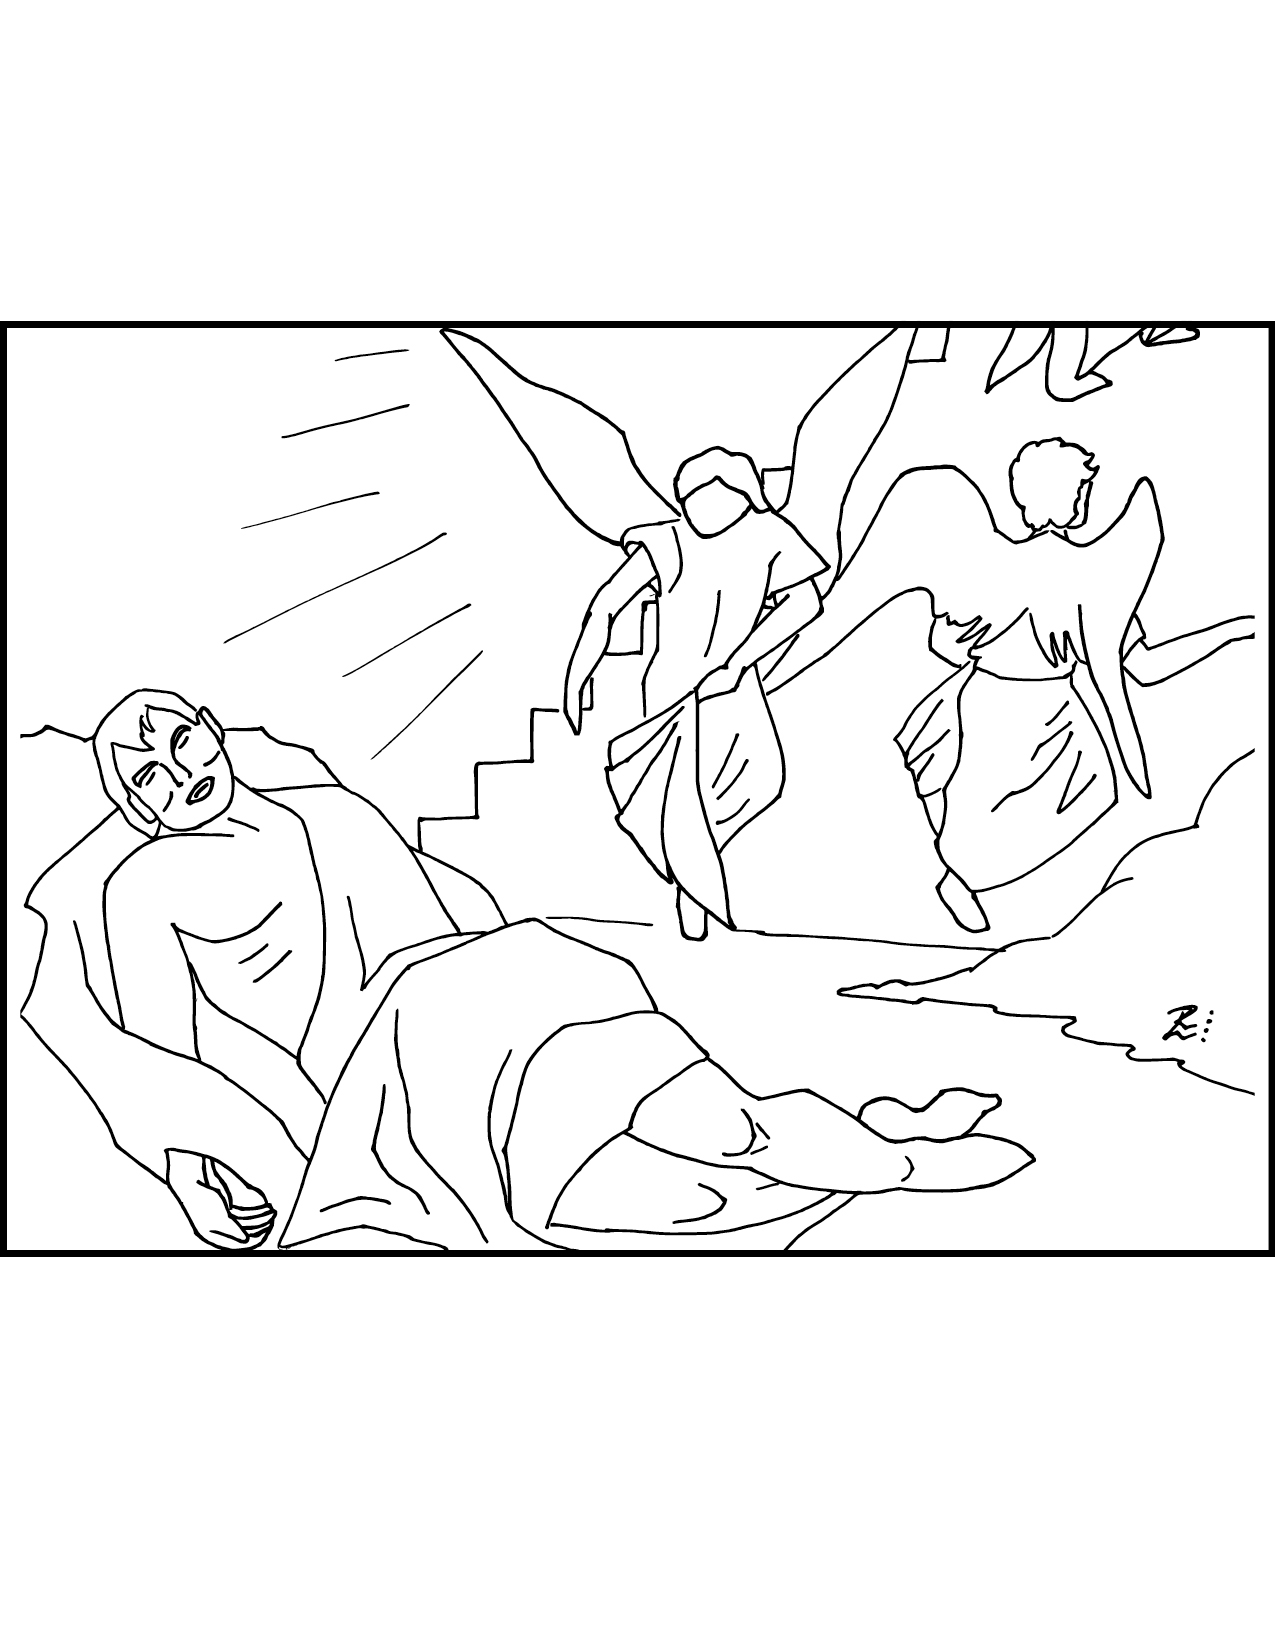 Seedpod coloring pages starting with jesus